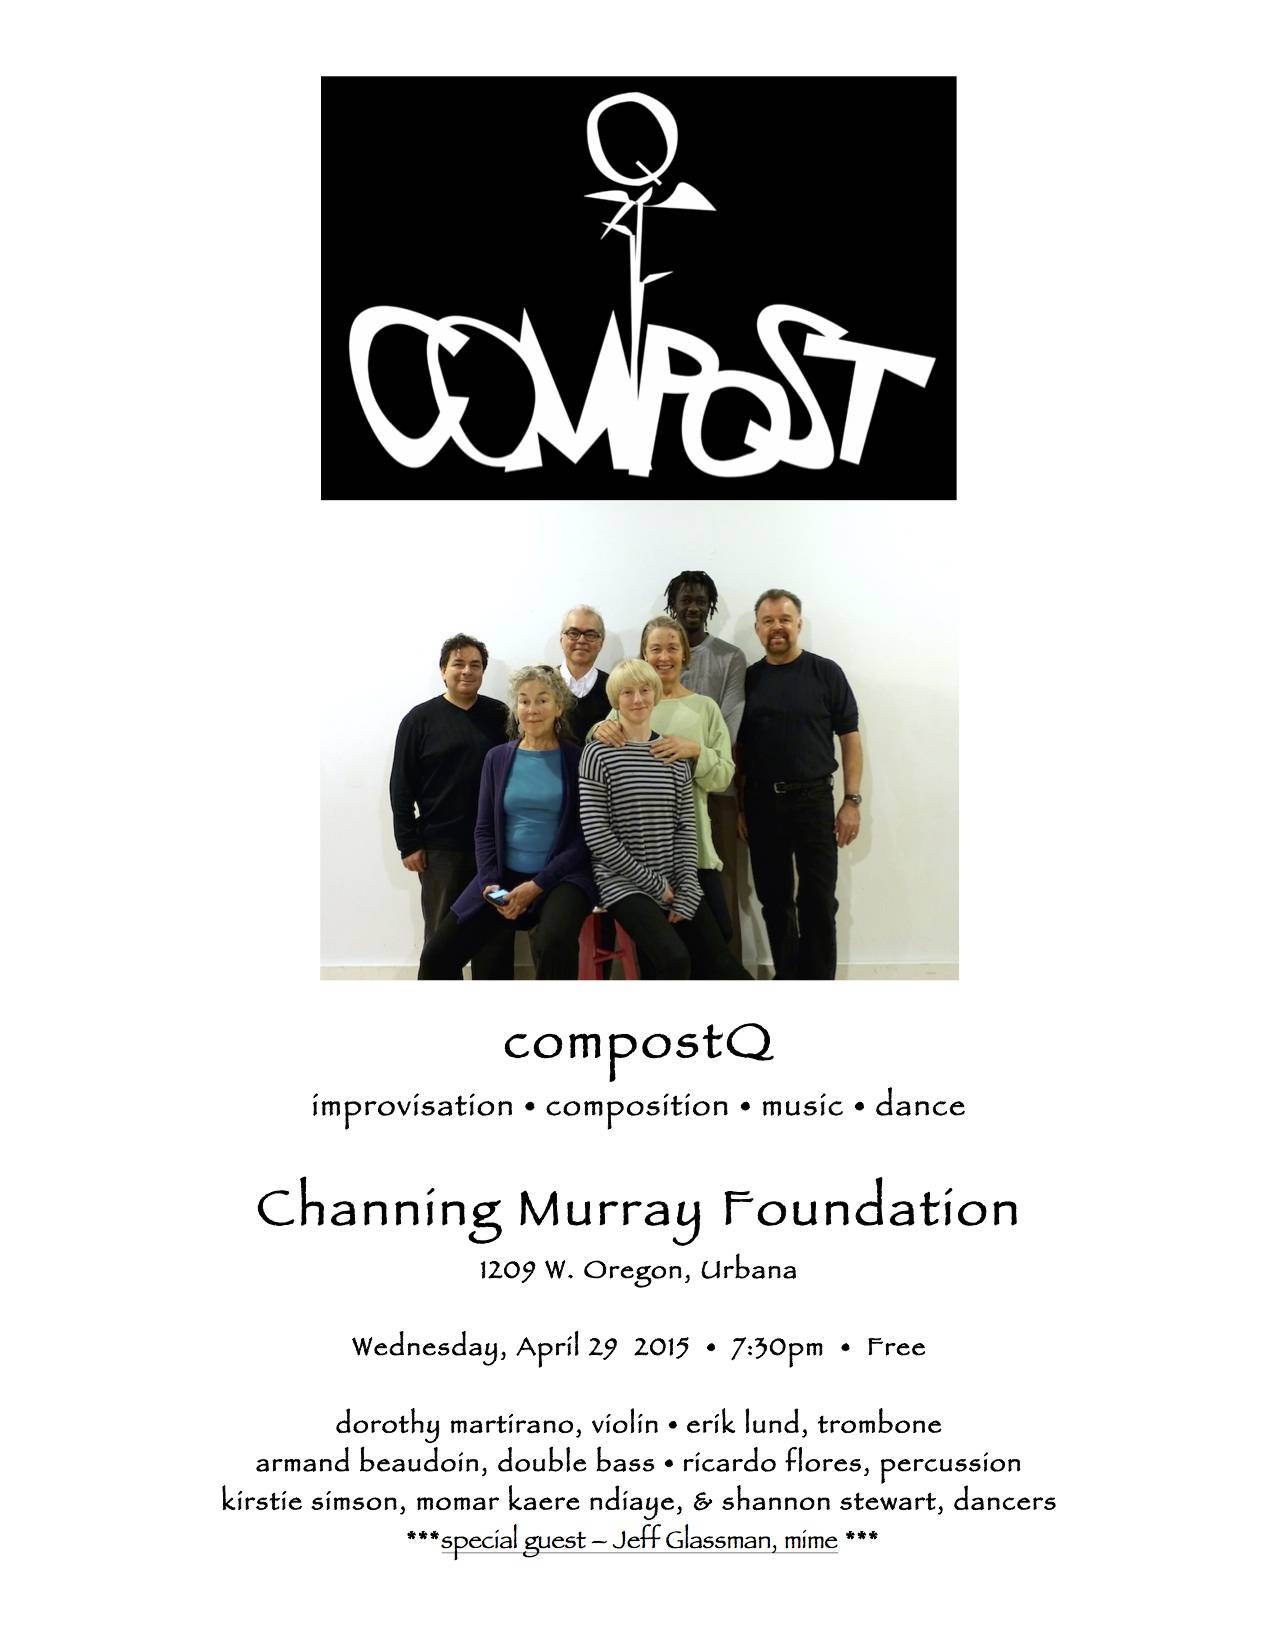 CompostQ at Channing Murray for one night only